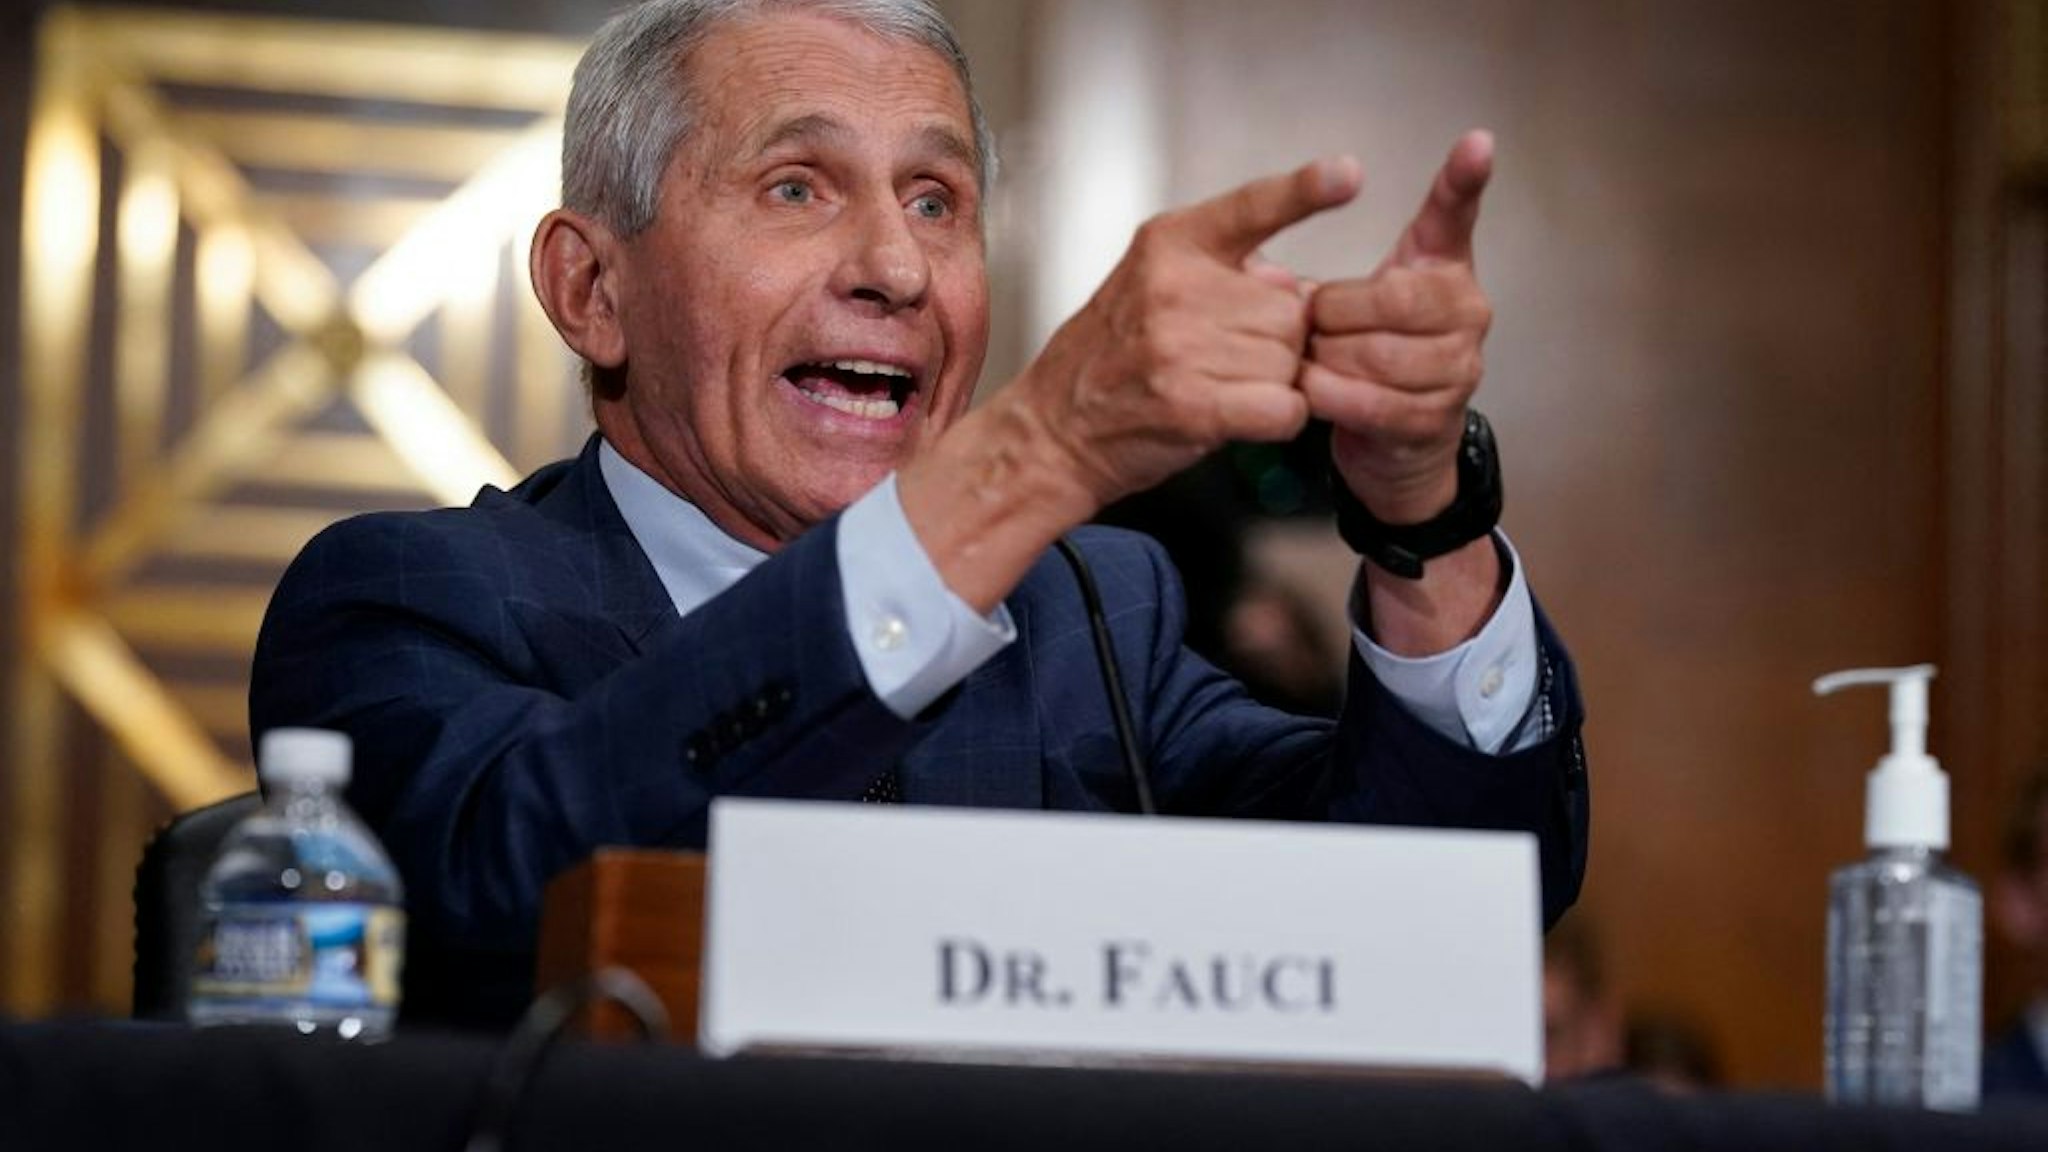 Dr. Anthony Fauci responds to accusations by Sen. Rand Paul, R-KY, as he testifies during the Senate Health, Education, Labor, and Pensions Committee hearing on Capitol Hill in Washington,DC on July 20, 2021. (Photo by J. Scott Applewhite / POOL / AFP) (Photo by J. SCOTT APPLEWHITE/POOL/AFP via Getty Images)